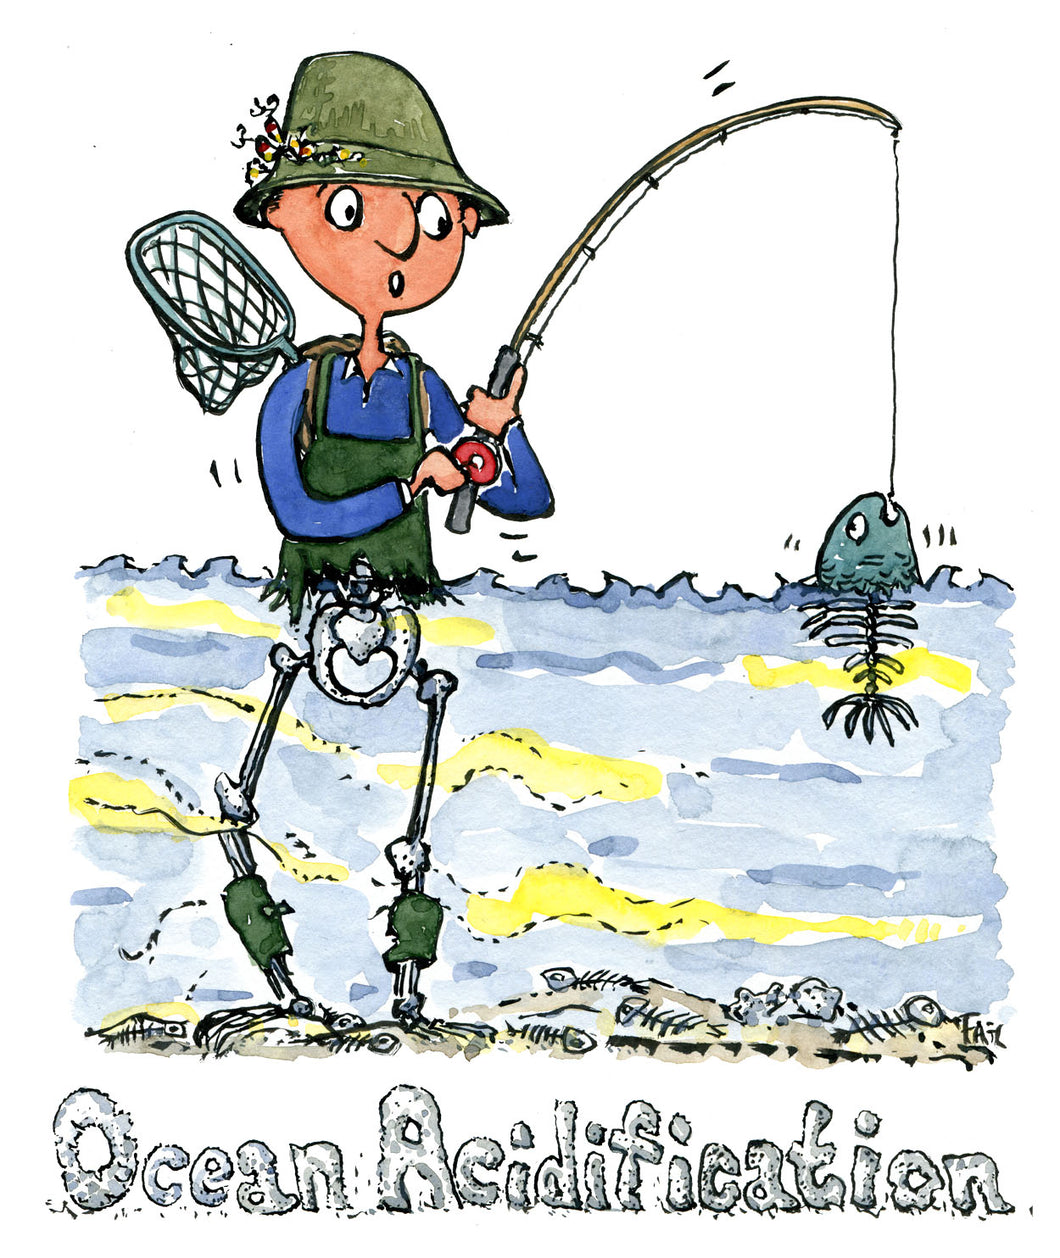 fisherman fishing in ocean where fish turns to skeletons, illustration by Frits Ahlefeldt